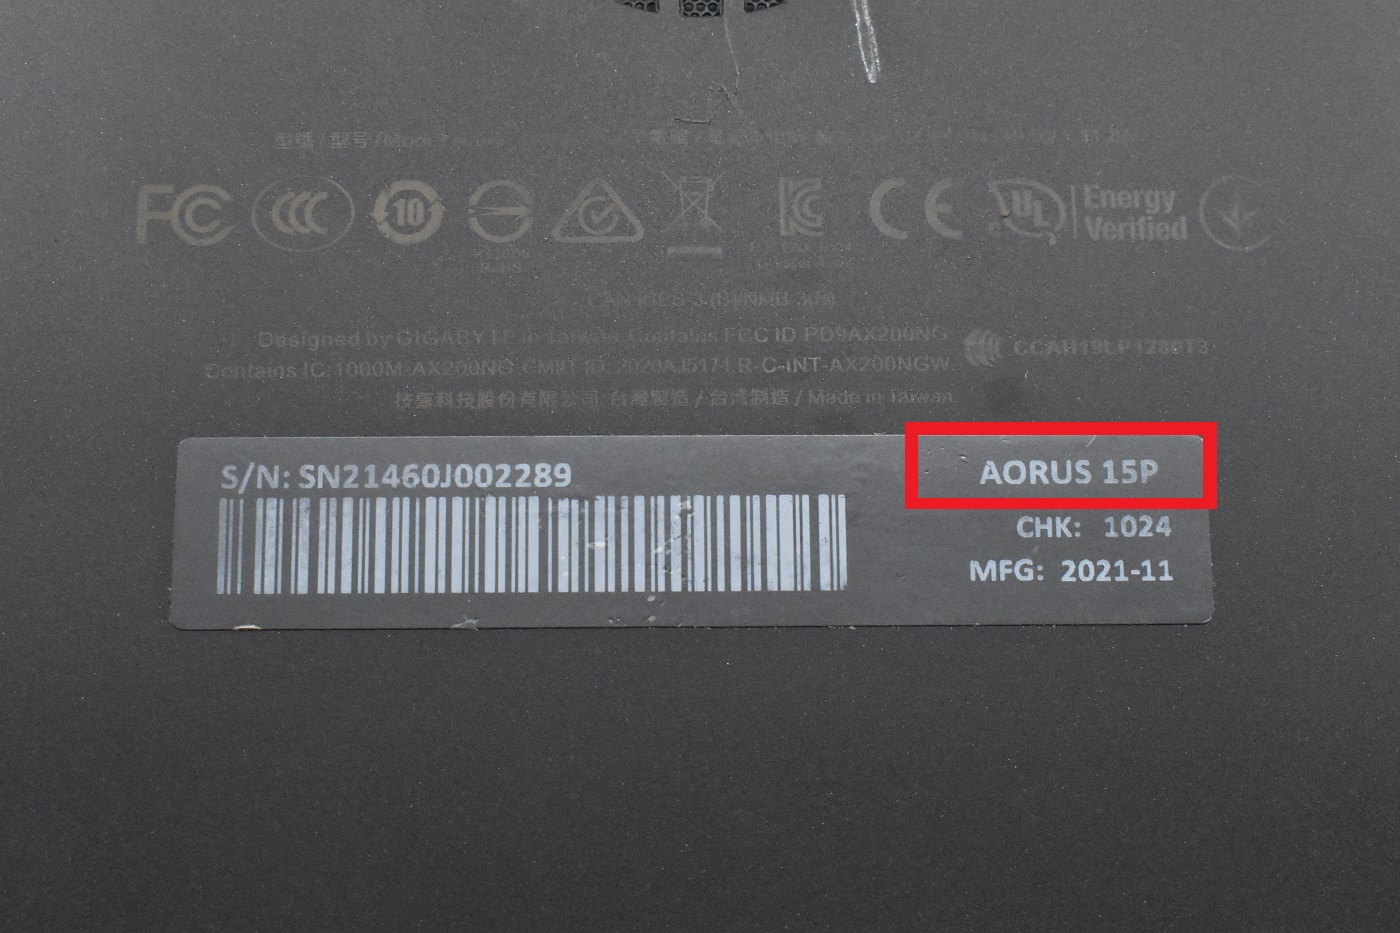 How to Find Your Aorus Laptop Model Number